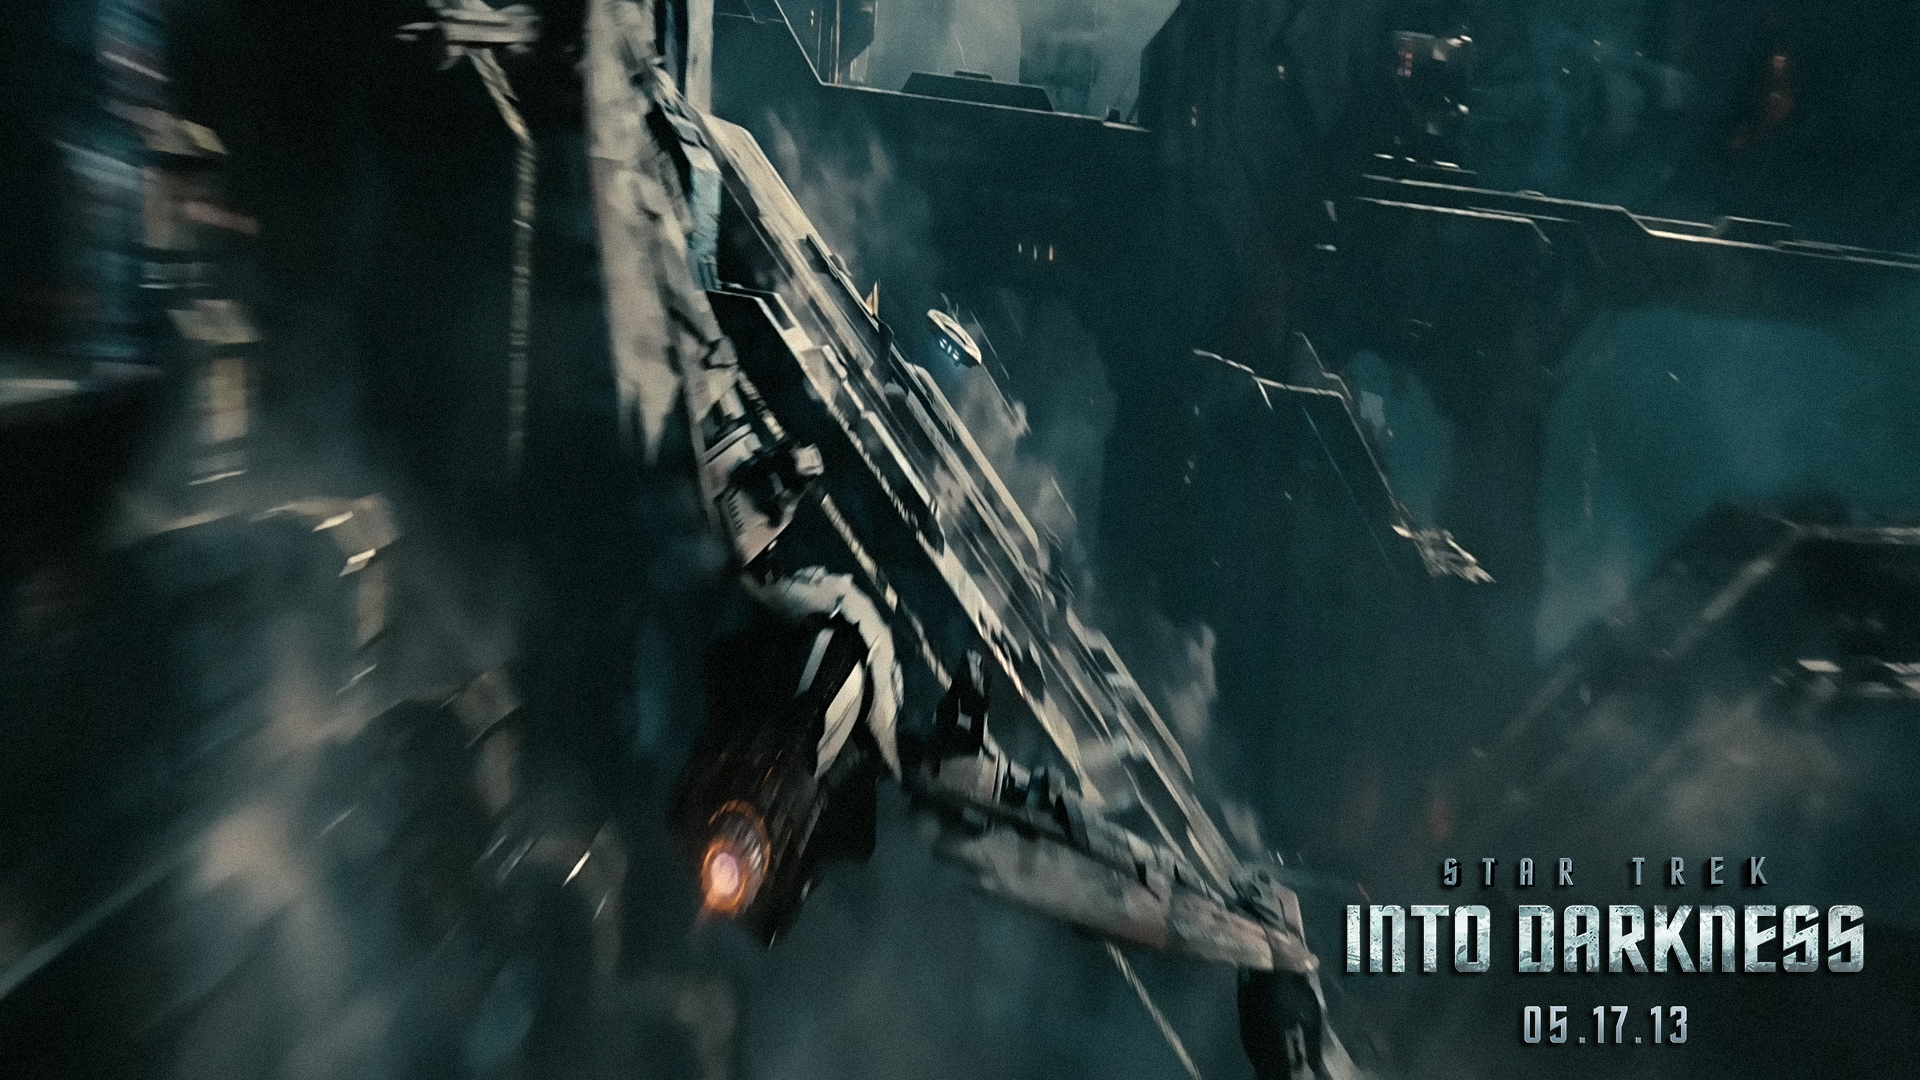 Star Trek Into Darkness Wallpaper And Theme For Windows